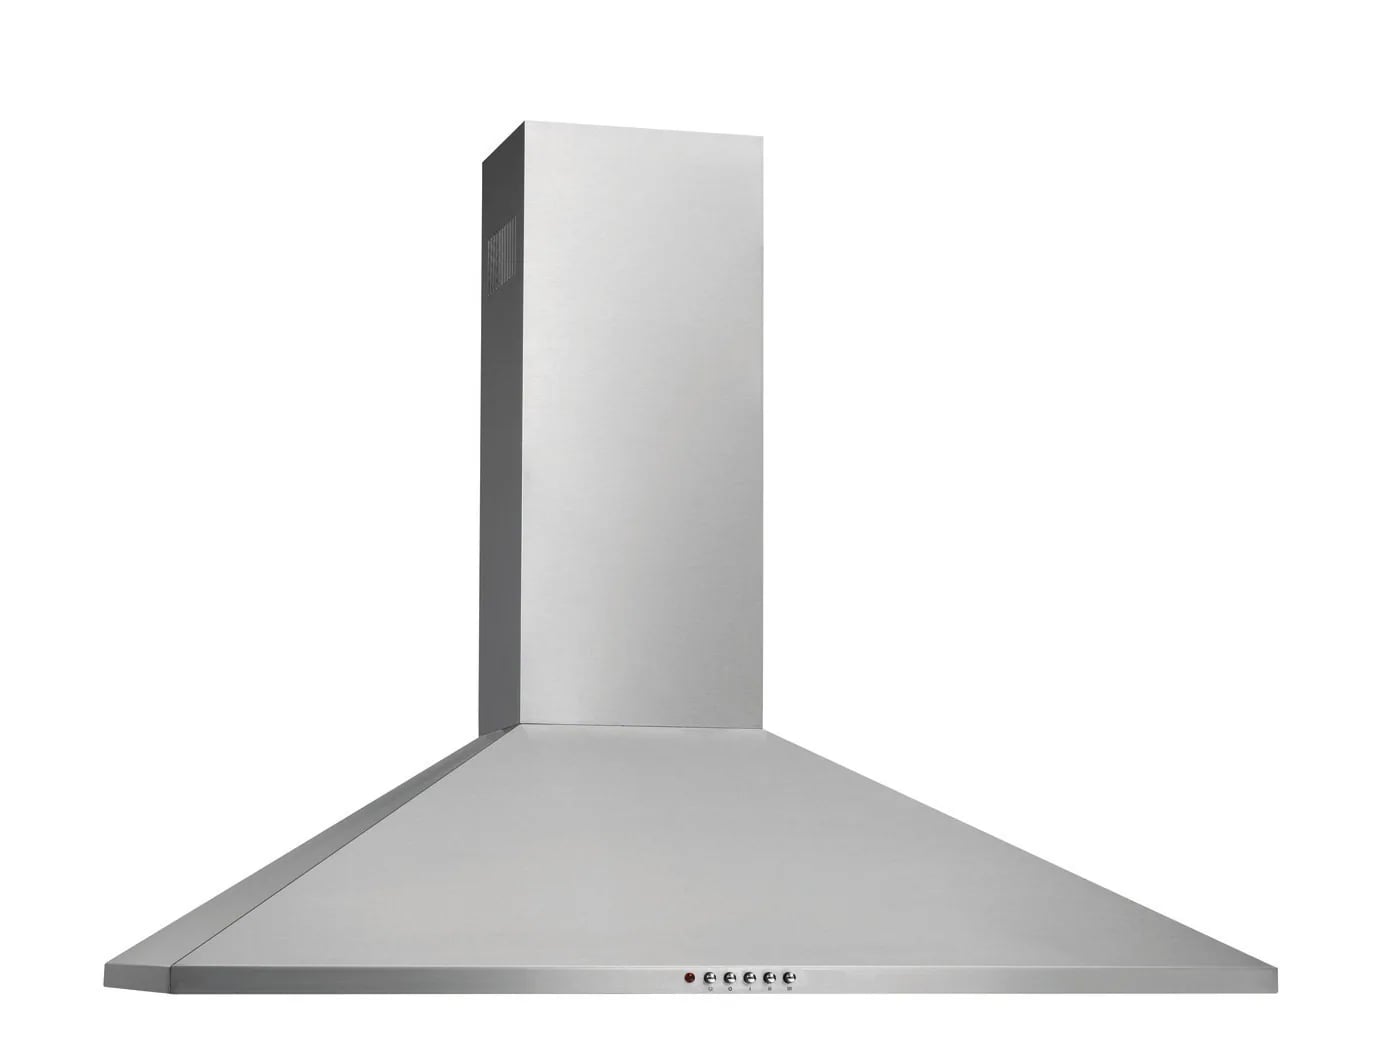 Frigidaire - 35.375 Inch 400 CFM Wall Mount and Chimney Range Vent in Stainless - FHWC3655LS